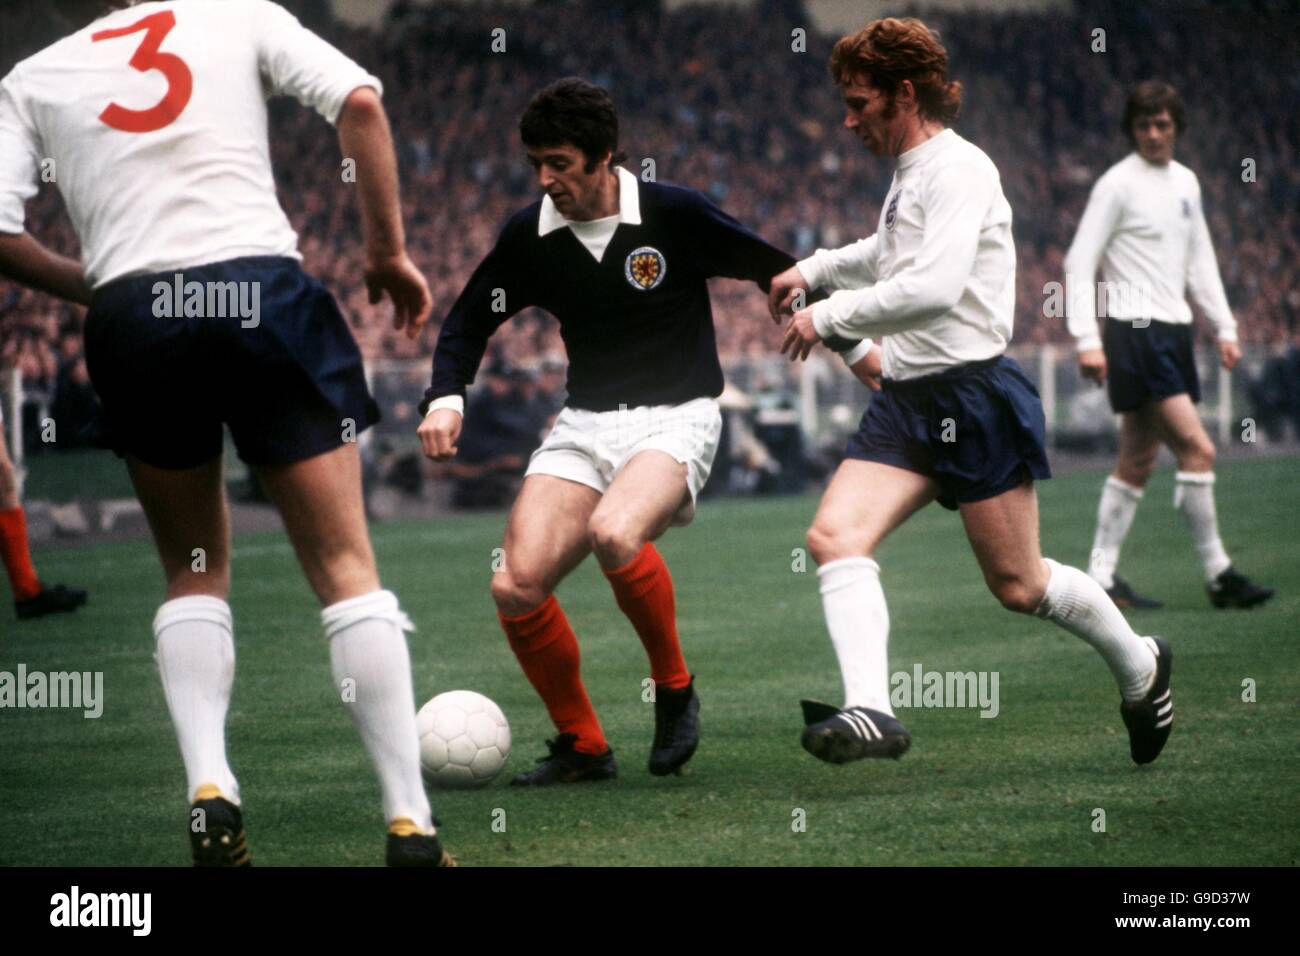 Scotland's Willie Morgan (c) is tracked by England's Emlyn Hughes (l) and Alan Ball (r) Stock Photo